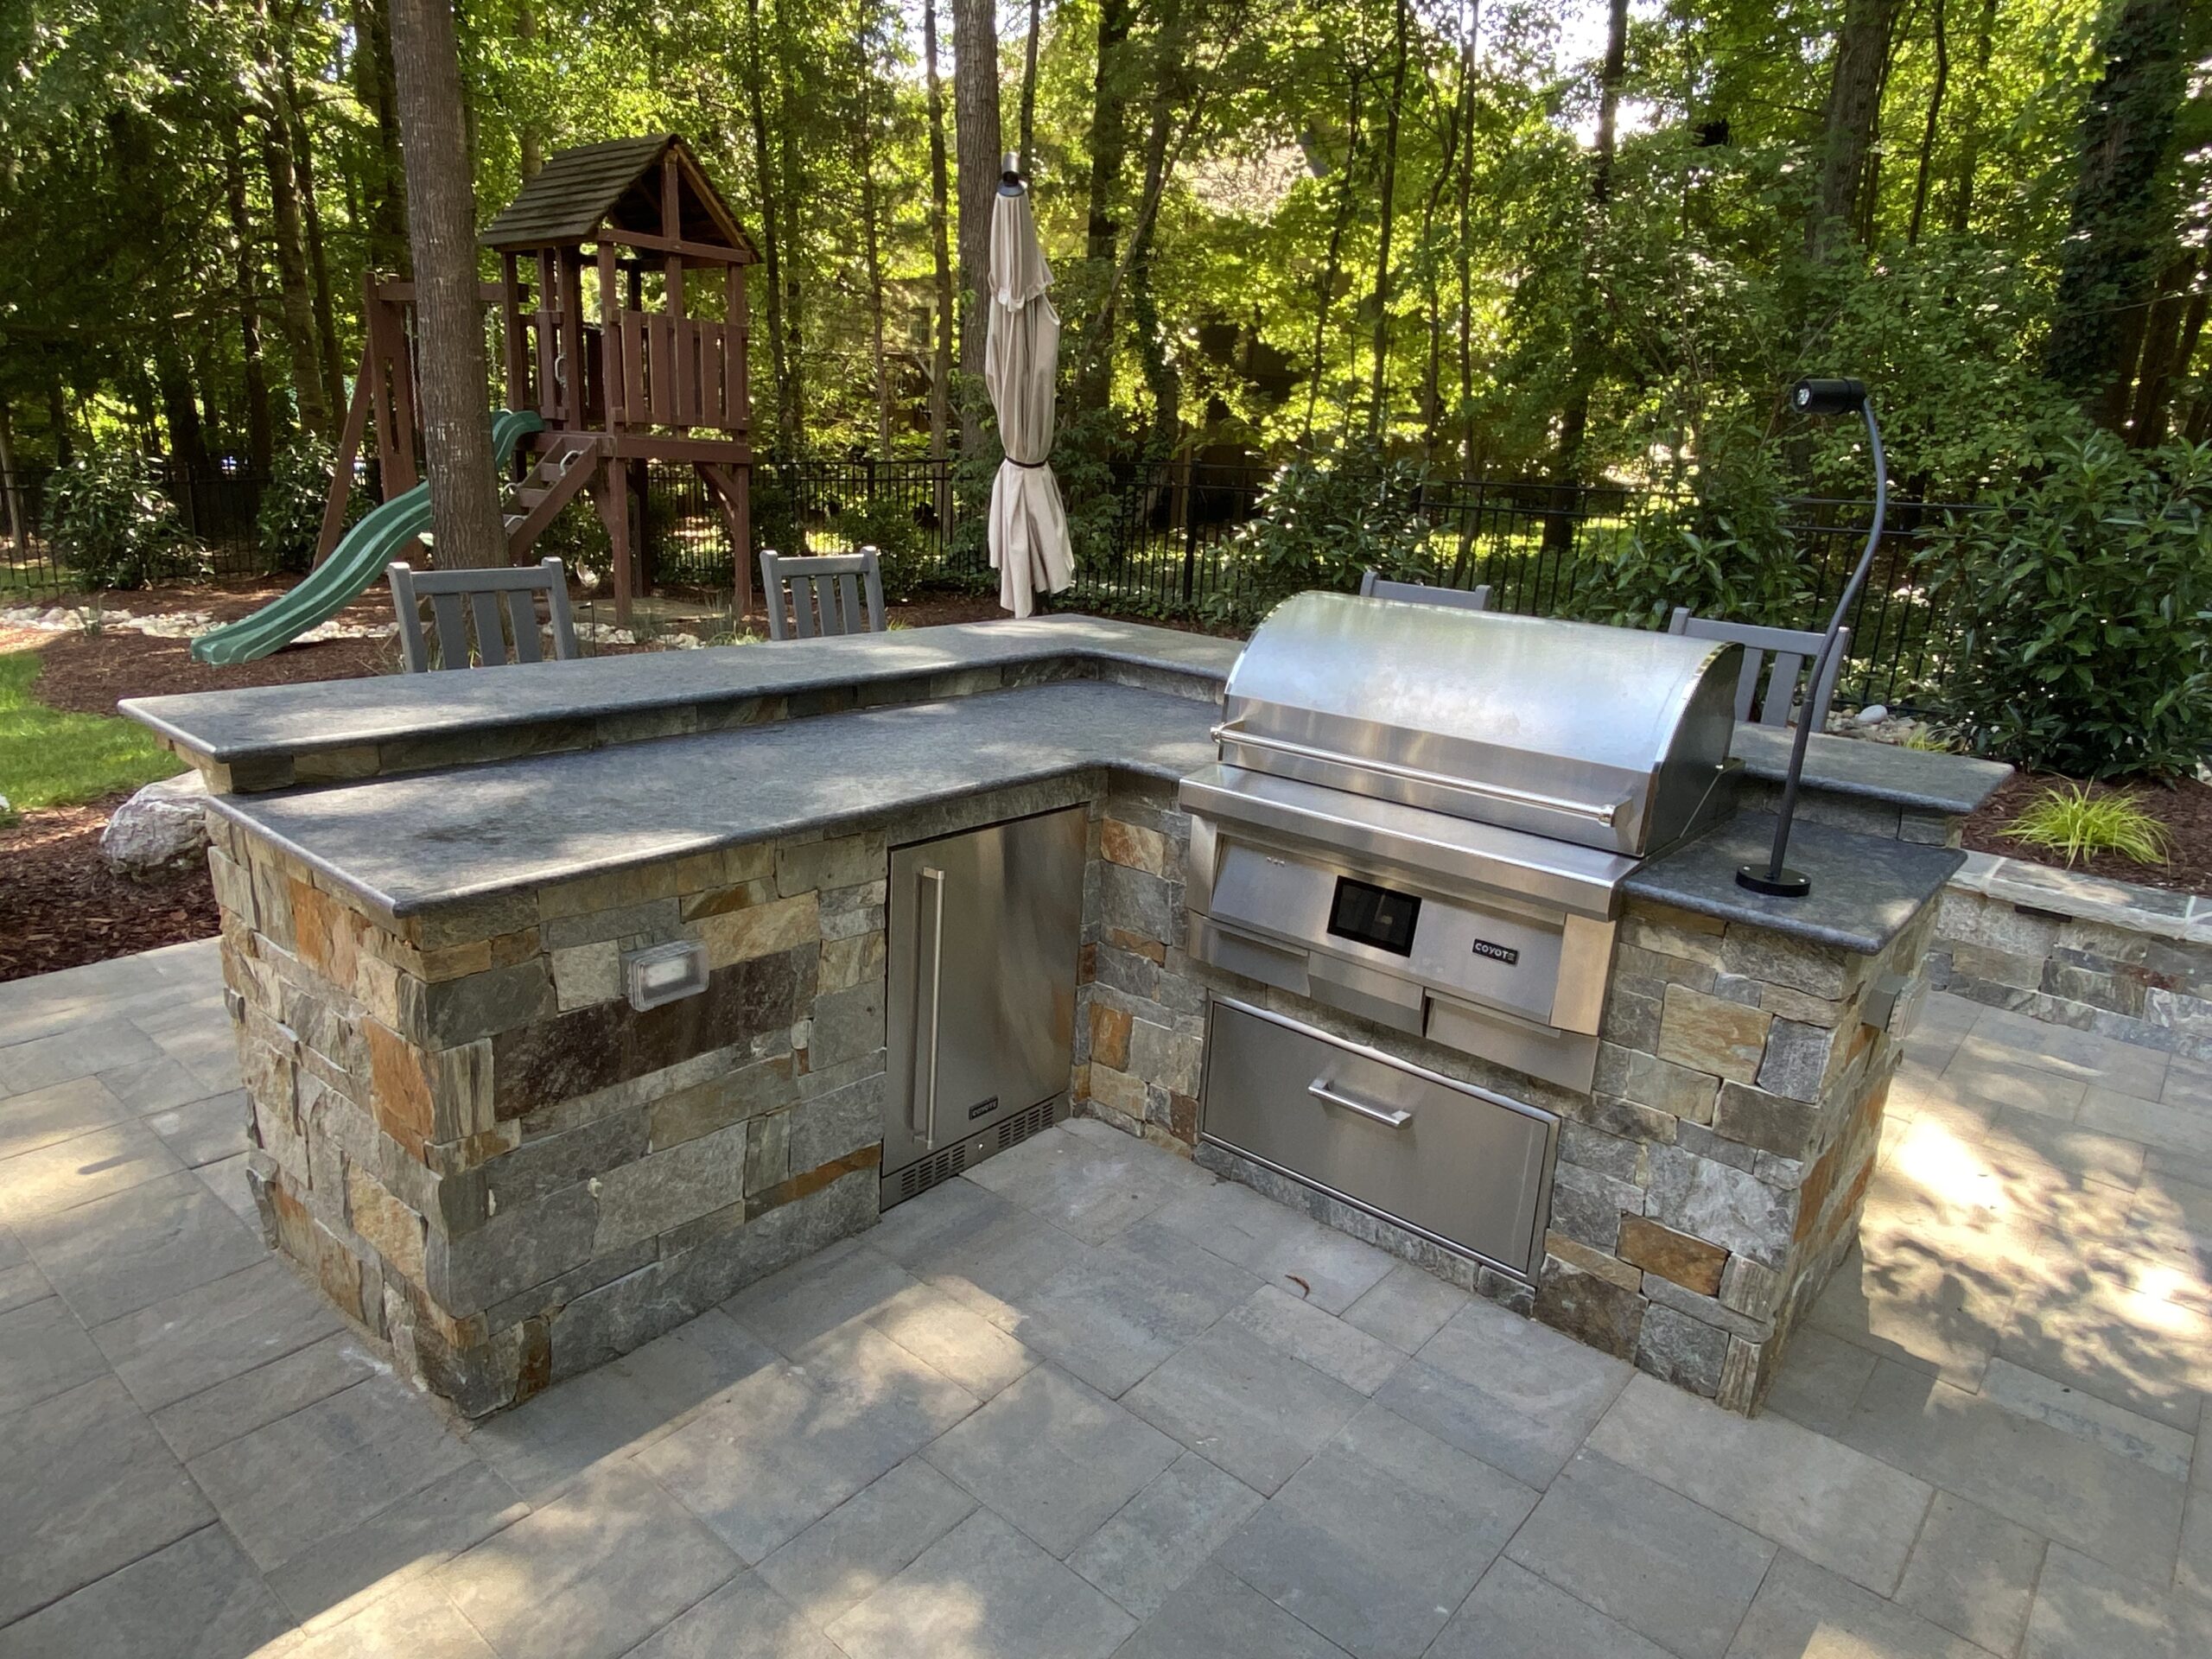 Raleigh NC Landscaping Pictures: Outdoor Kitchen Photos: Landvision